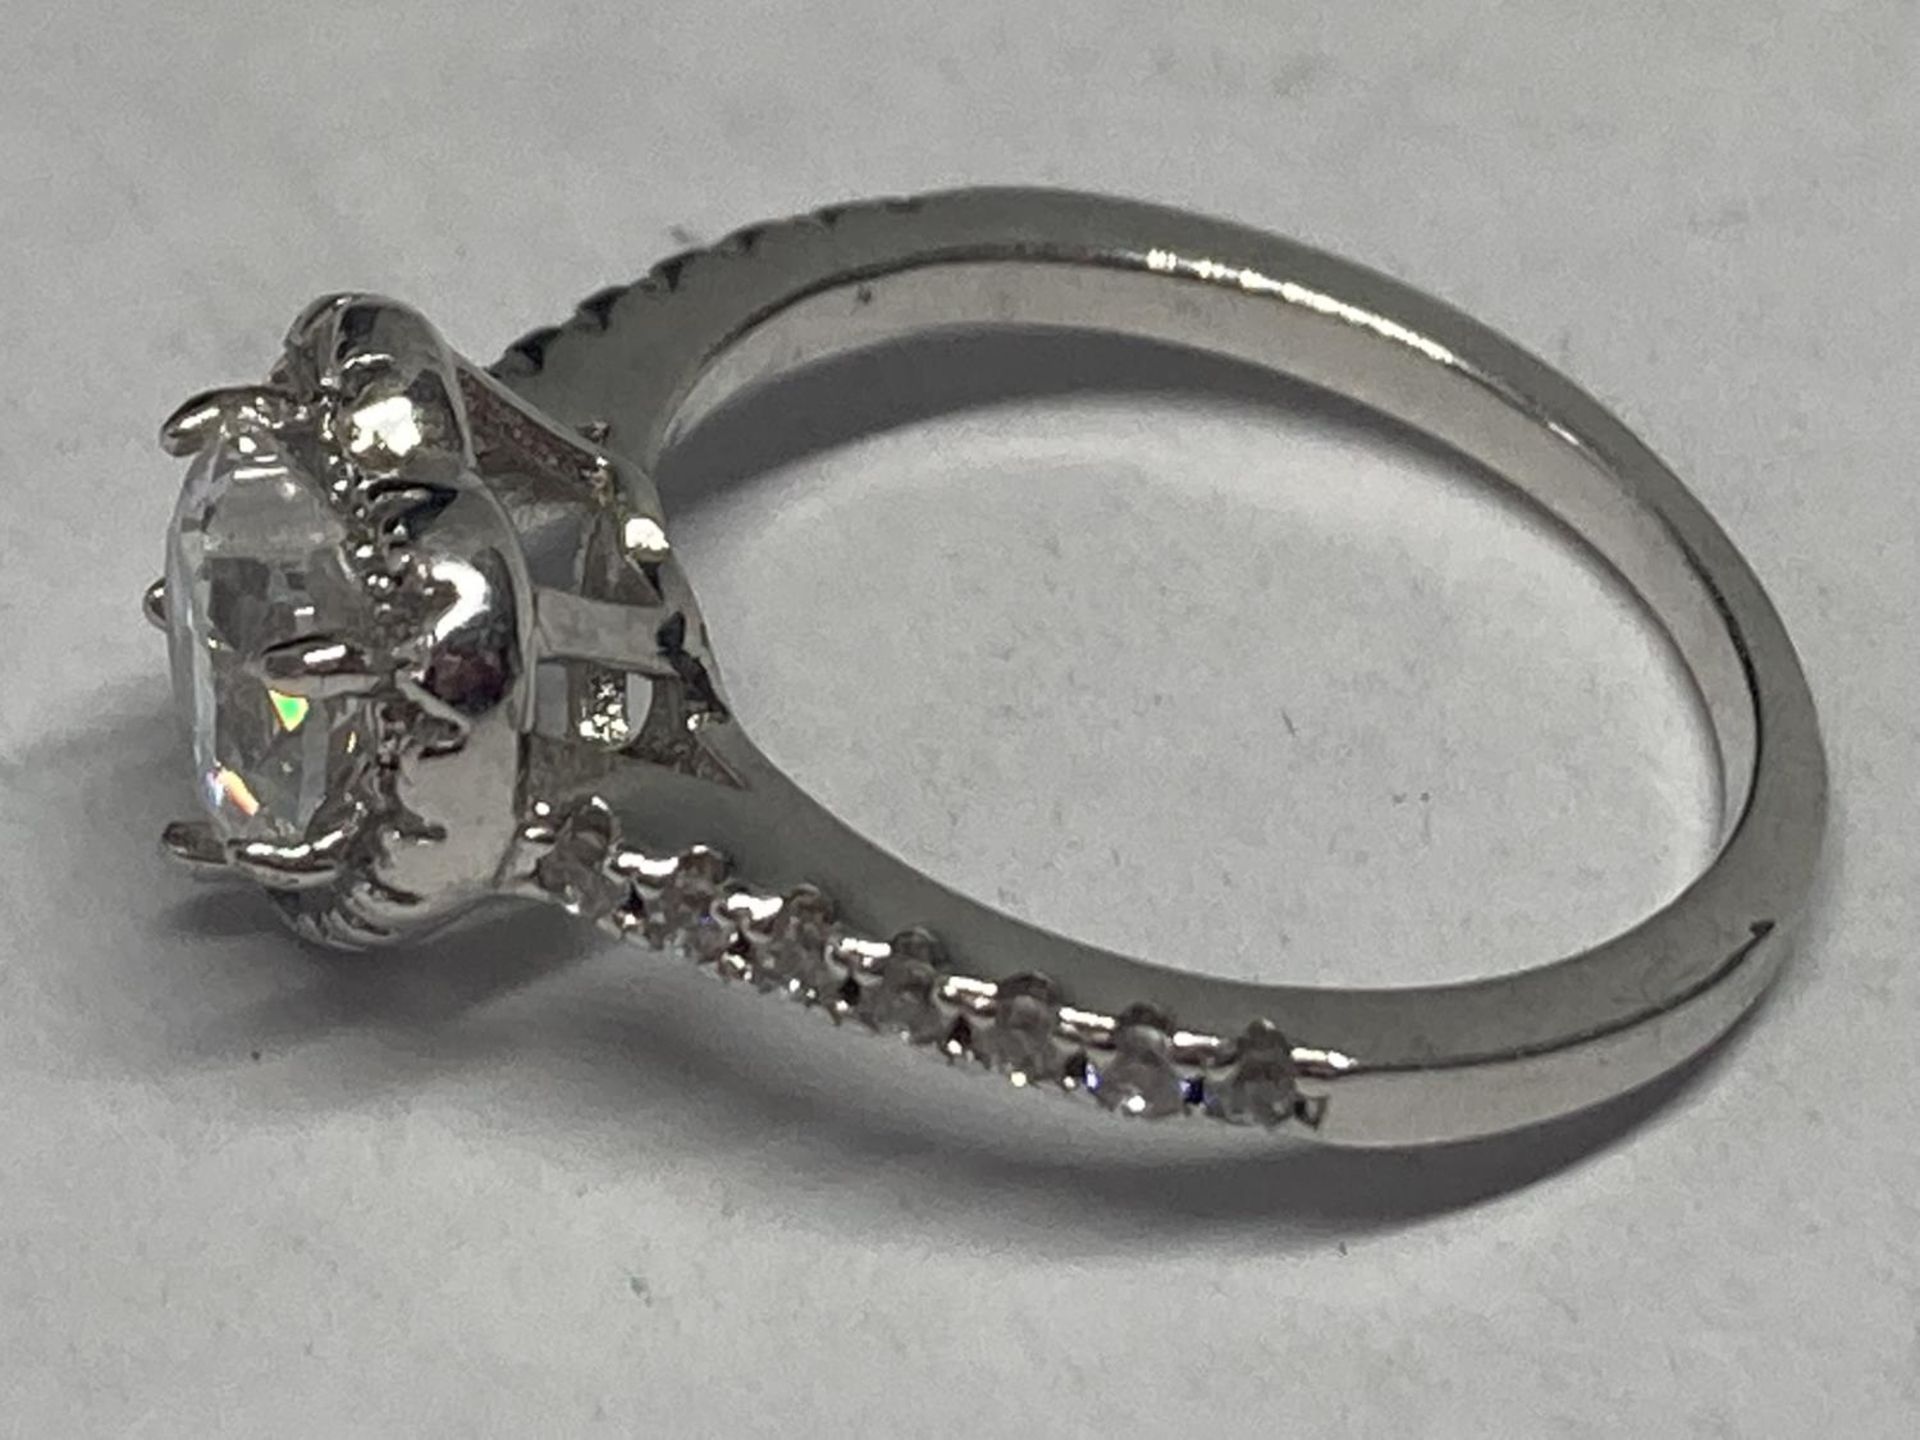 A MARKED 9K RING WITH 1 CARAT OF MOISSANITE IN A HEART DESIGN SIZE L/M GROSS WEIGHT 2.98 GRAMS - Image 2 of 4